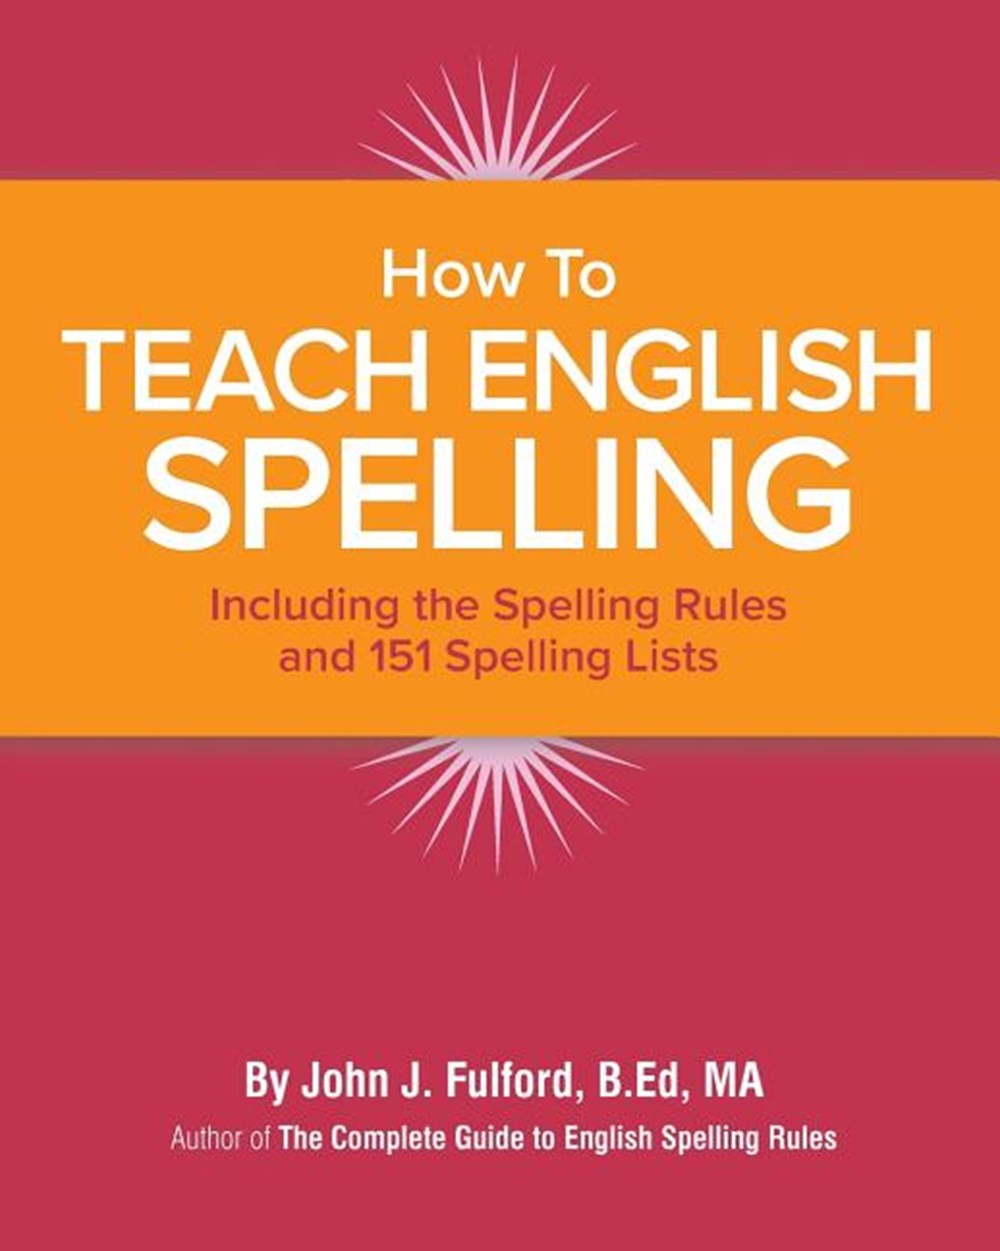 How to Teach English Spelling: Including The Spelling Rules and 151 Spelling Lists